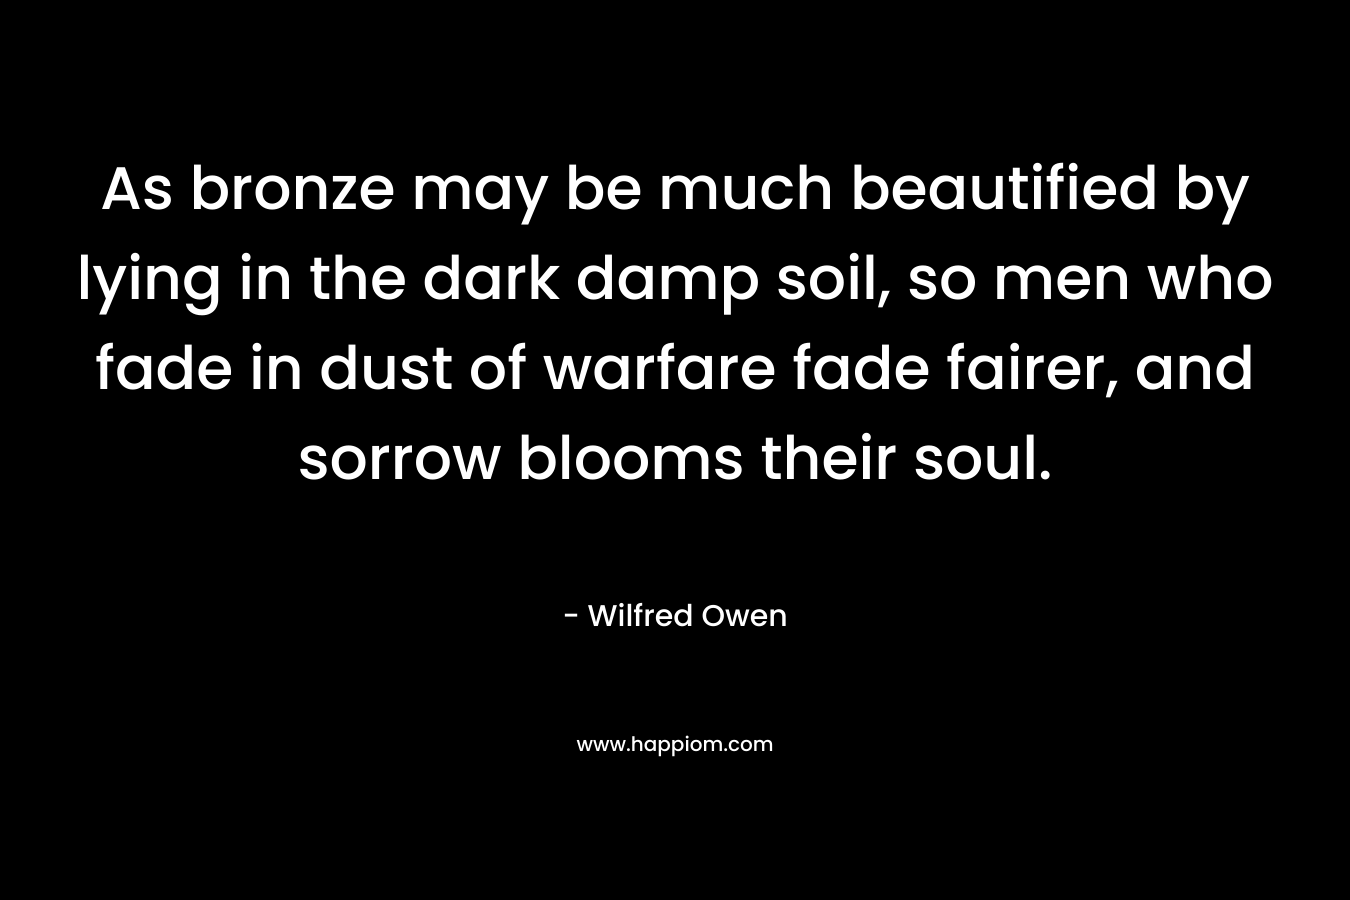 As bronze may be much beautified by lying in the dark damp soil, so men who fade in dust of warfare fade fairer, and sorrow blooms their soul. – Wilfred Owen